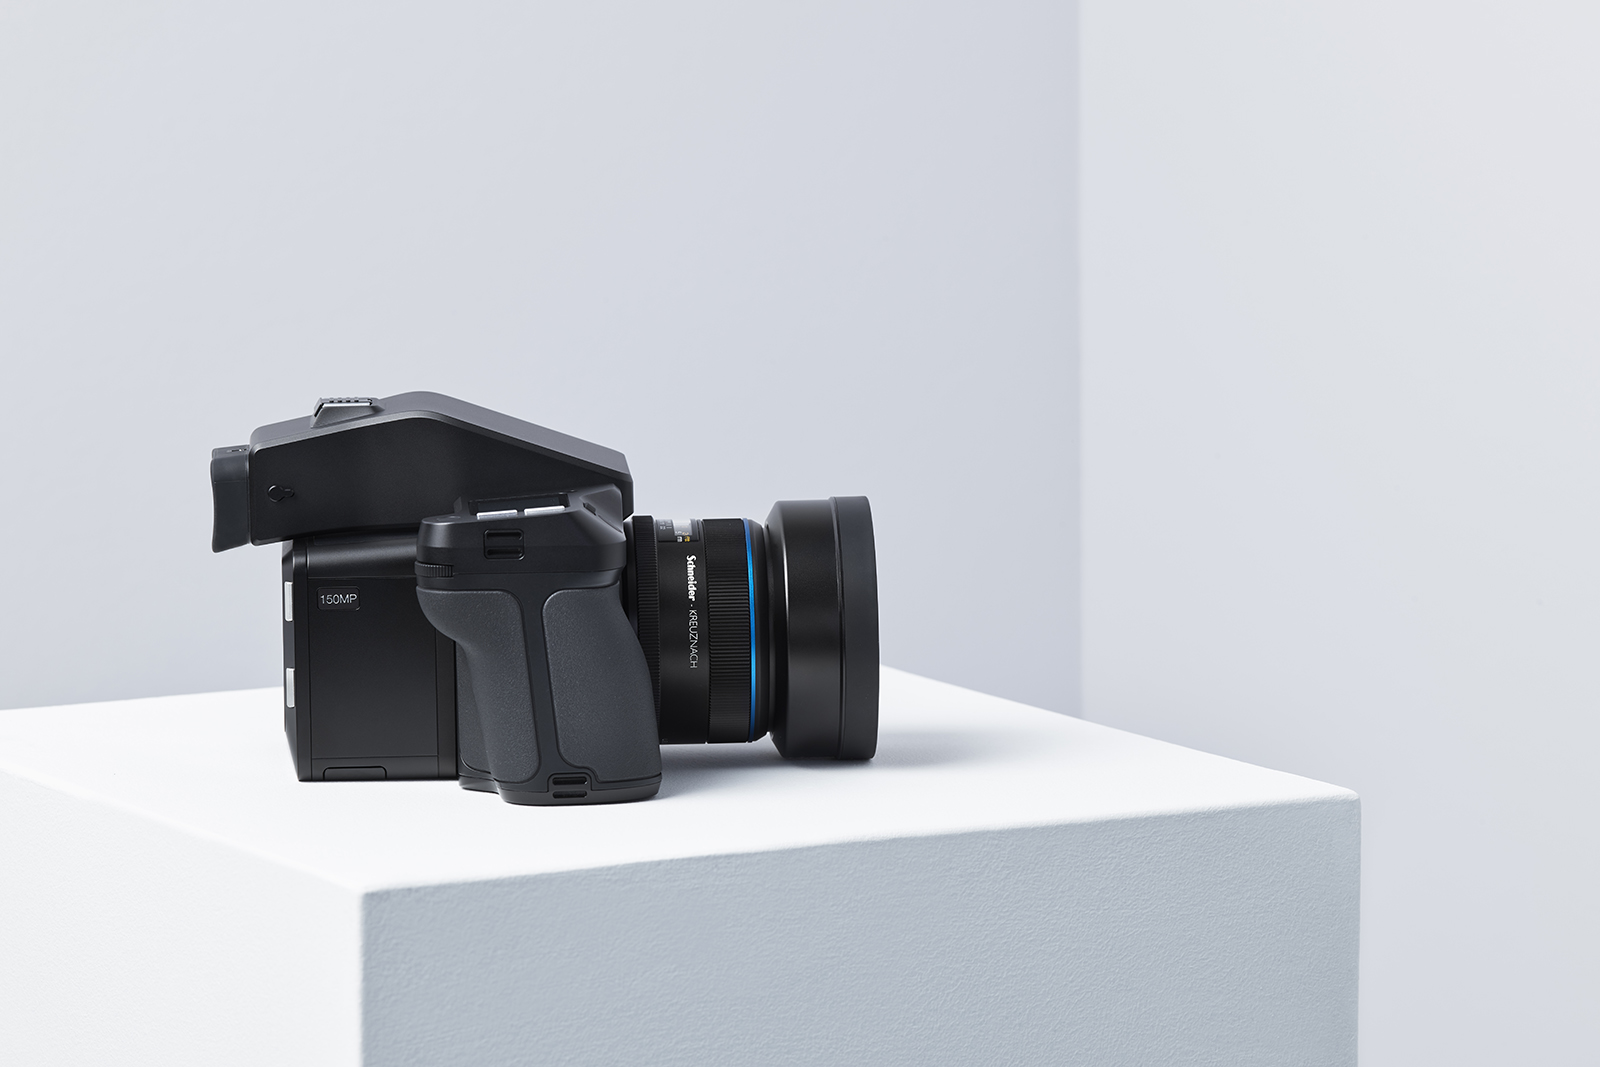 phase one infinity xf announced iq4 150mp camera system side view